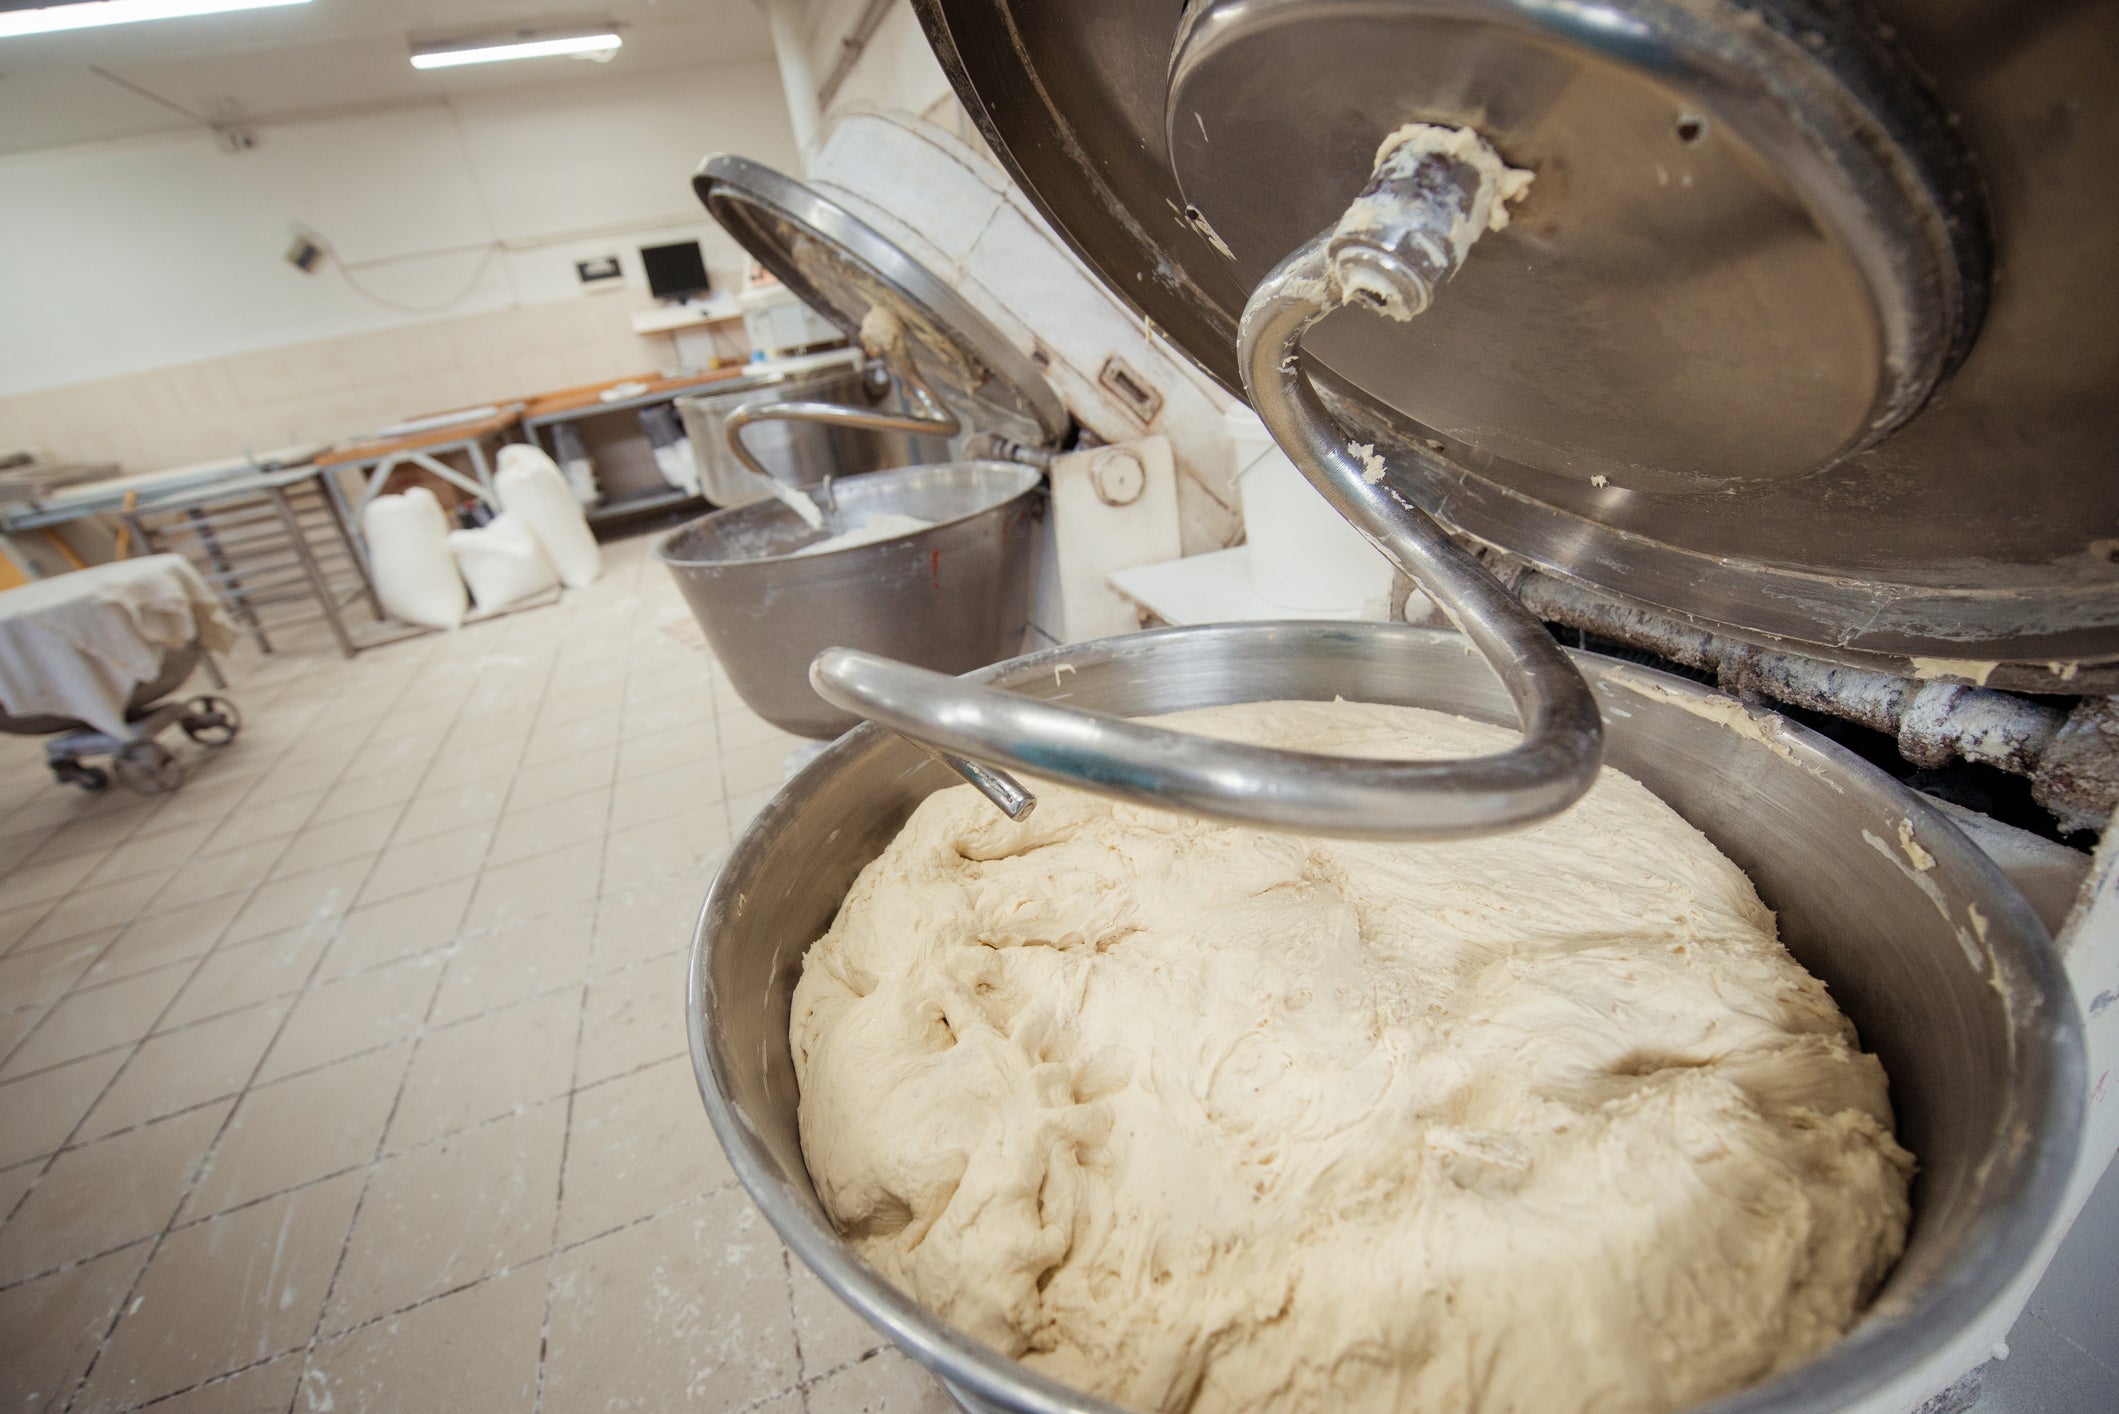 Commercial spiral mixers with dough